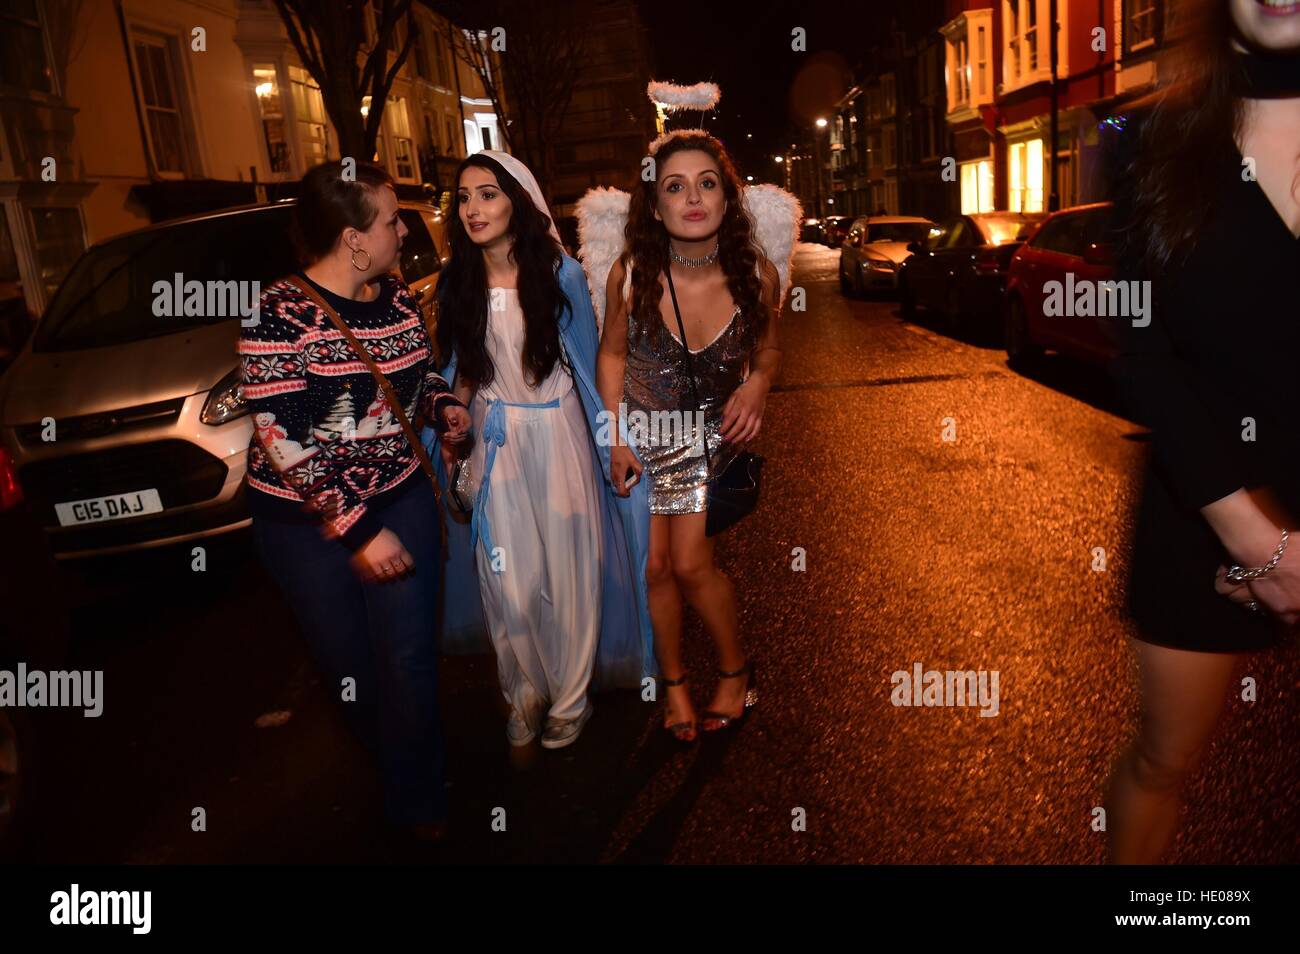 Aberystwyth, Wales, UK. 16th December 2016.     People out in Aberystwyth on ‘Booze Black Friday' or ‘Mad Friday', the last working Friday before Christmas when workers celebrate with their colleagues .   Alcohol sales in pubs, clubs and off-licences rise dramatically on this day   Photo © Keith Morris/Alamy Live News Stock Photo